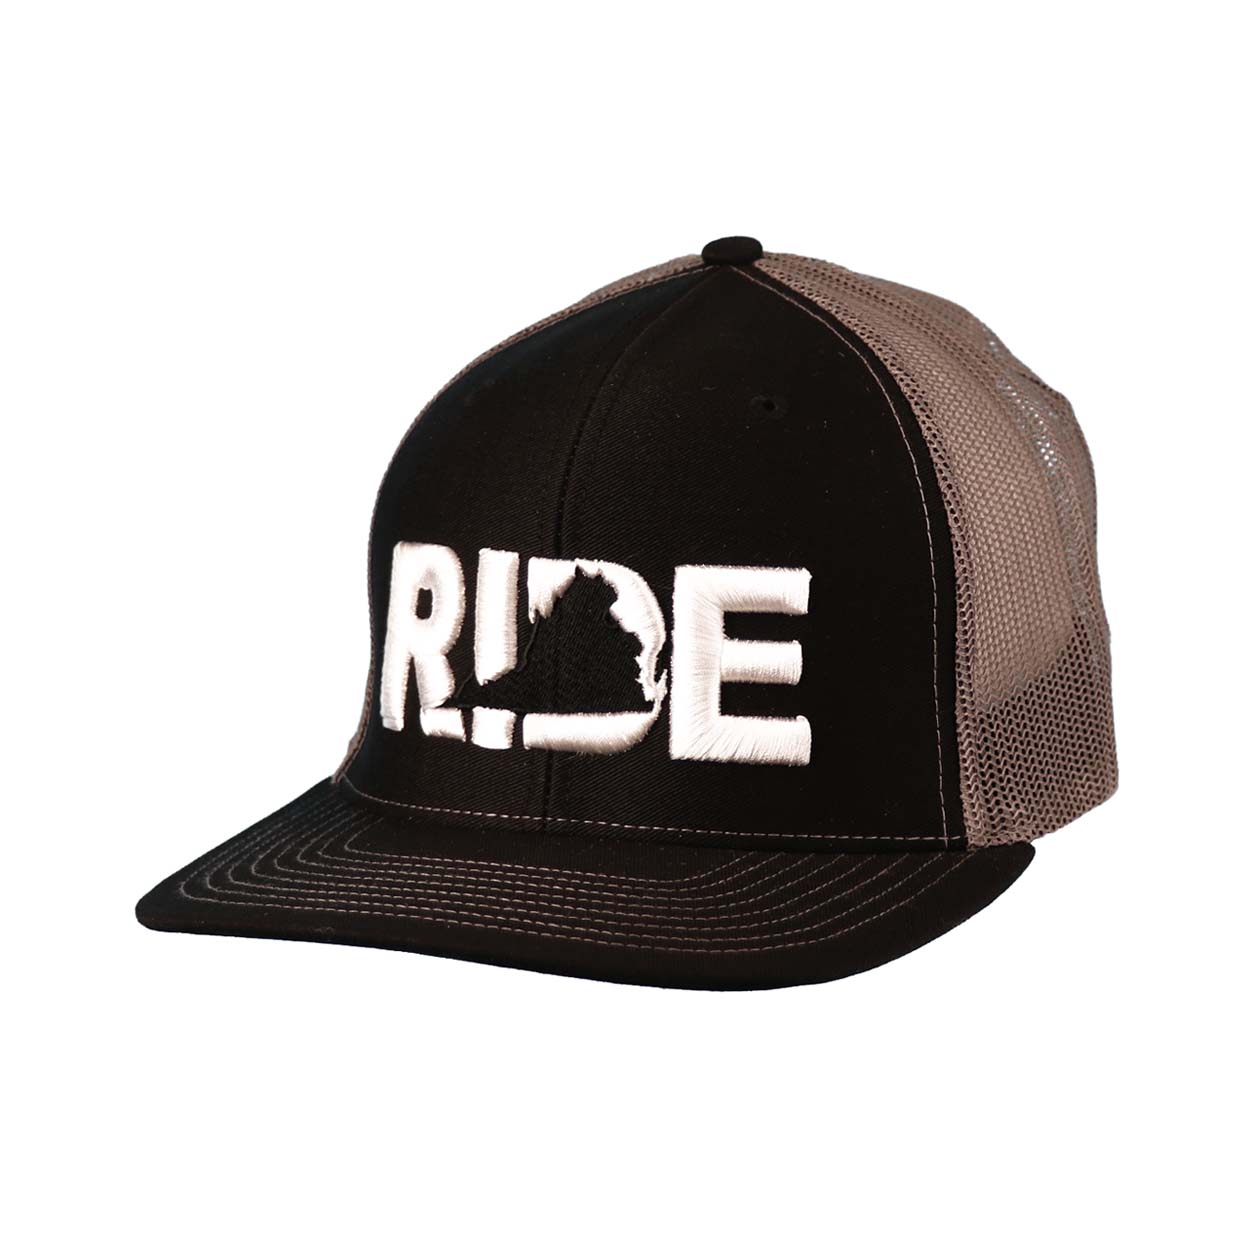 Ride Virginia Classic Pro 3D Puff Embroidered Snapback Trucker Hat Black/Gray